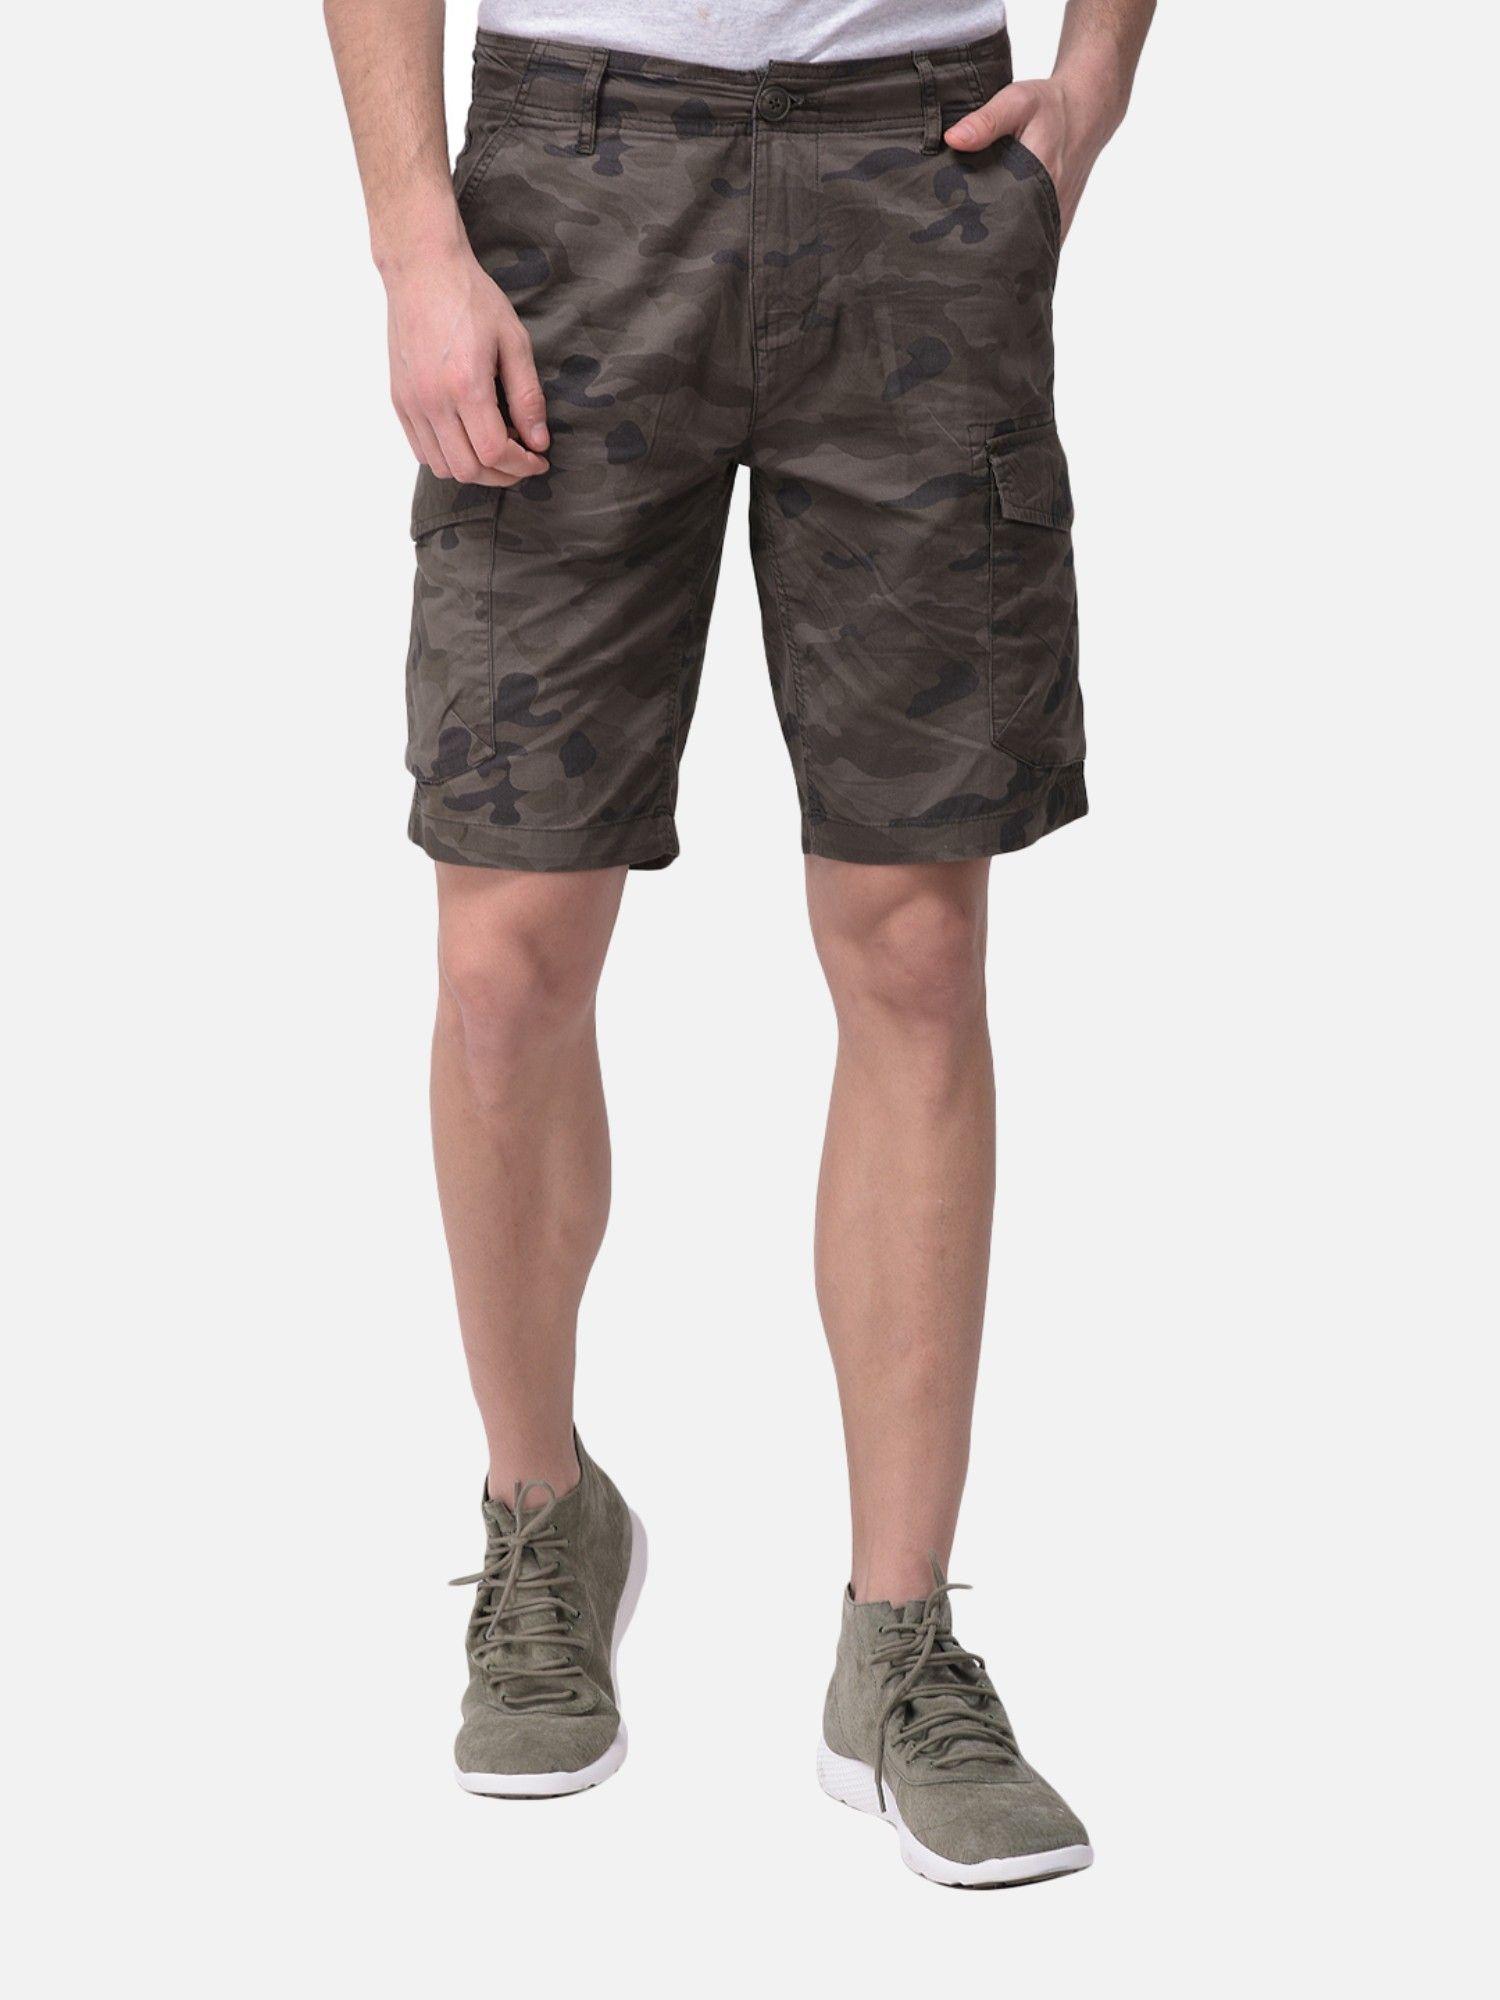 multi color camouflage shorts